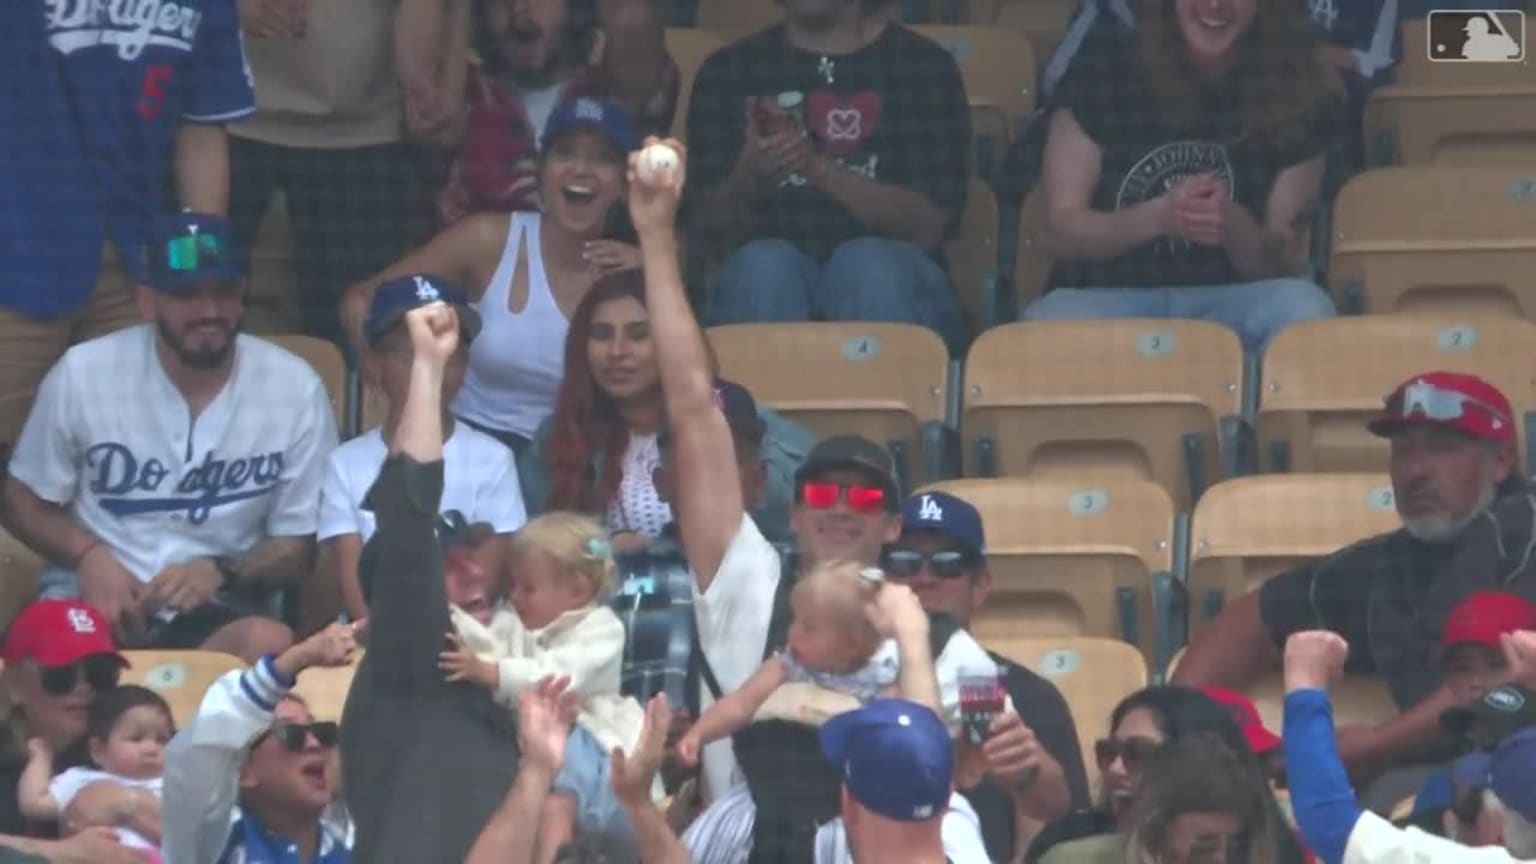 Baby-wearing, beverage-holding man catches foul ball with bare